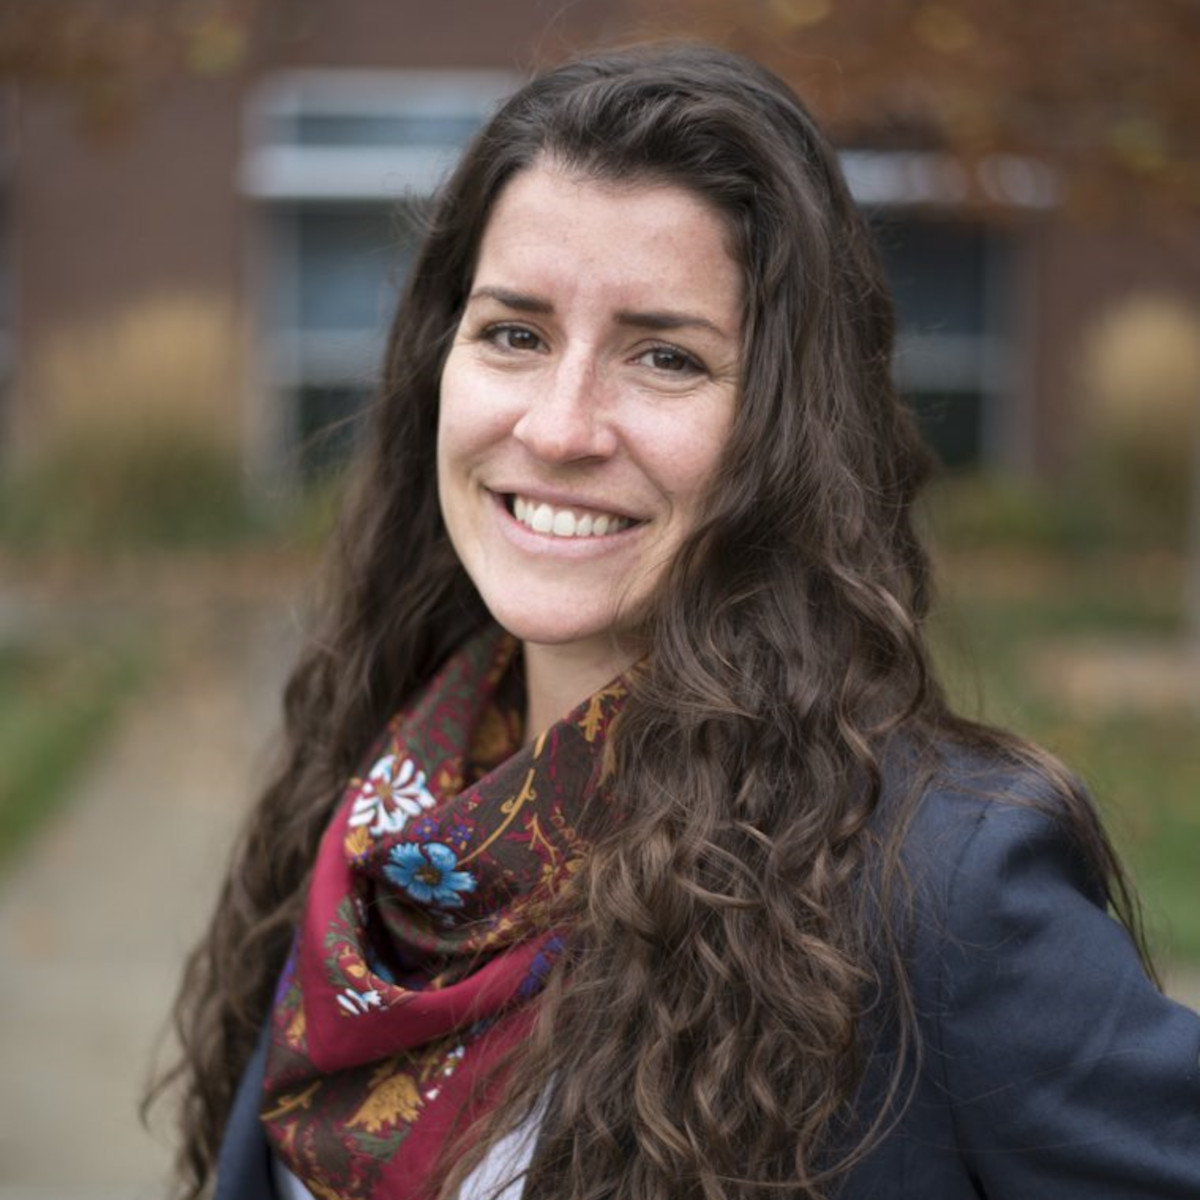 #uidaho Increases Water Research and Technology Center’s Presence in Boise with hire of Kendra Kaiser. A statewide team will assess water research needs and engage affected communities uidaho.edu/news/news-arti…